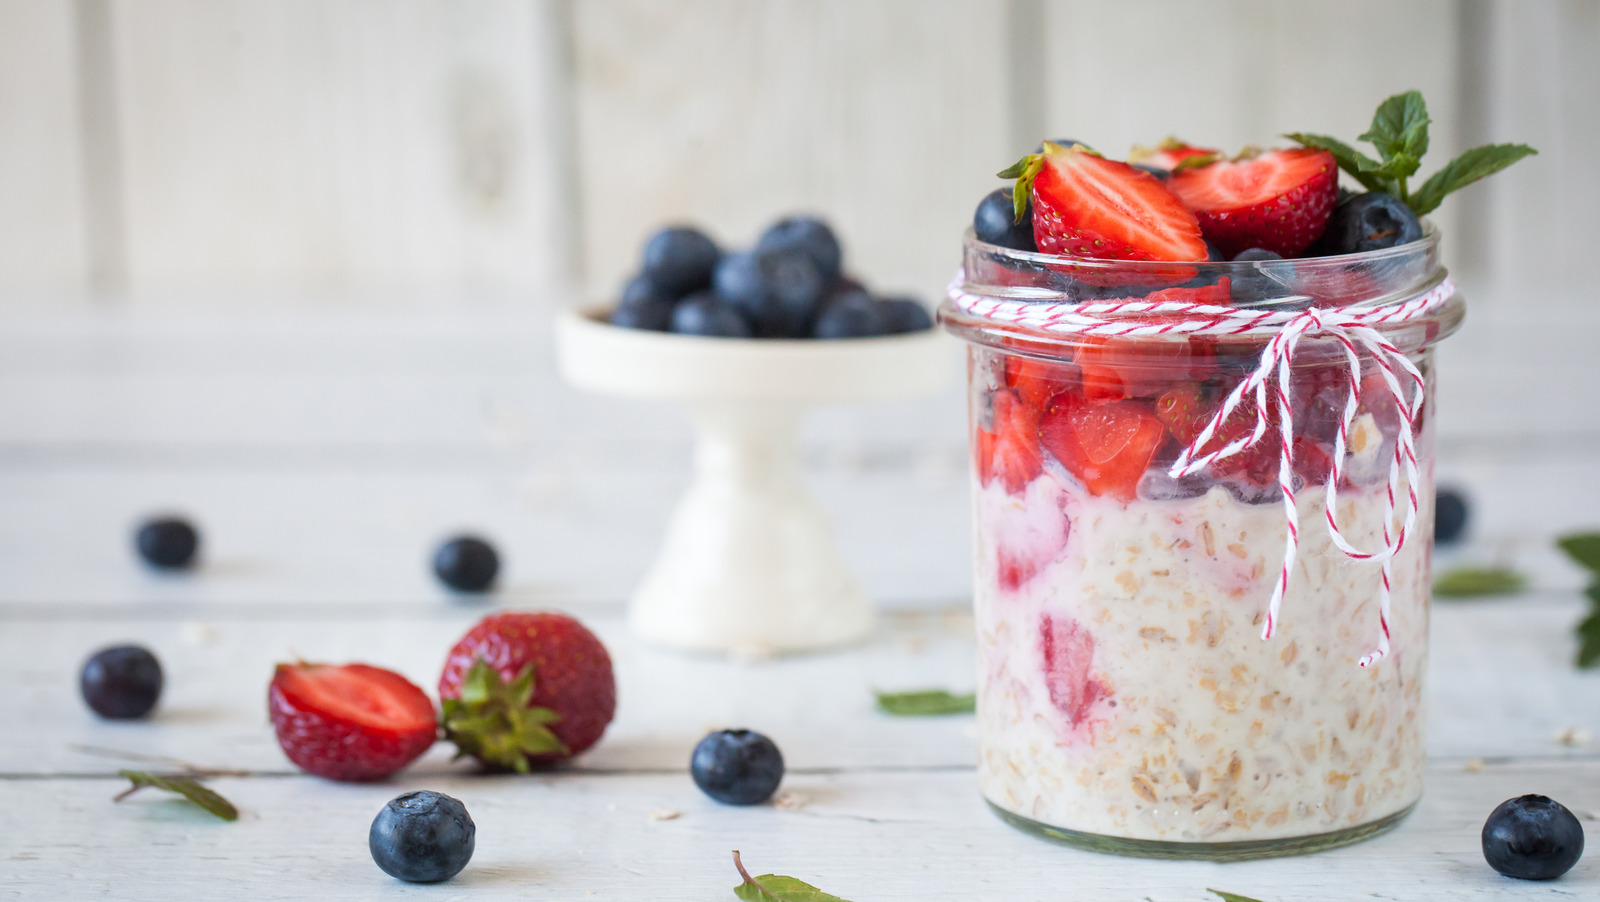 Use Your Nearly Empty Jam Jars To Make Easy Overnight Oats